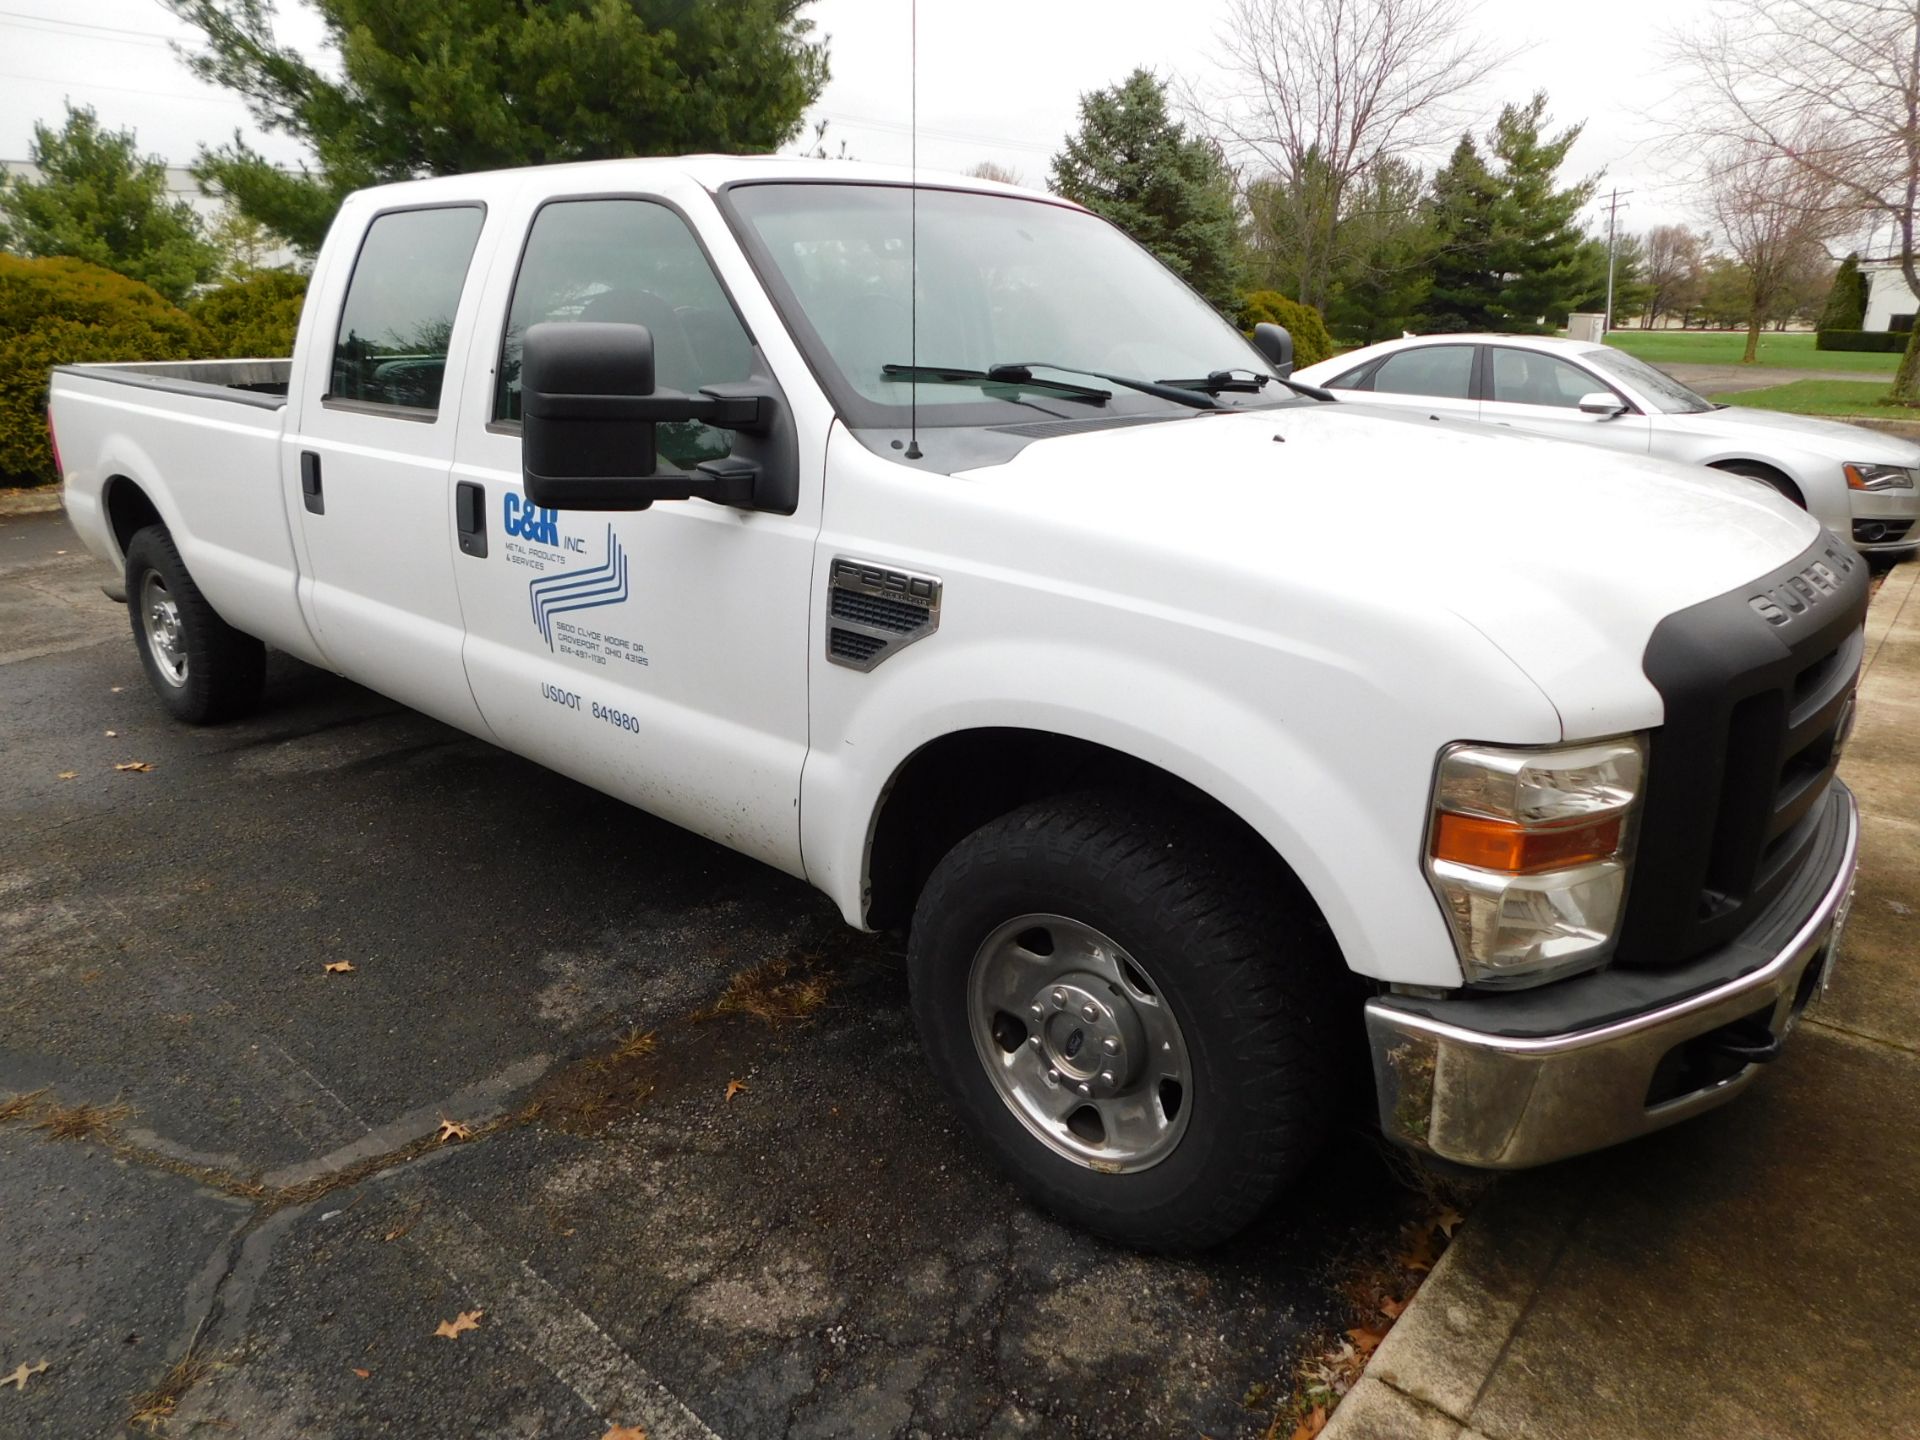 2008 Ford F250XL Super Duty Pick Up Truck, VIN 1FTSW20548EB51209, Crew Cab, Automatic, 8' Bed, 190, - Image 3 of 36